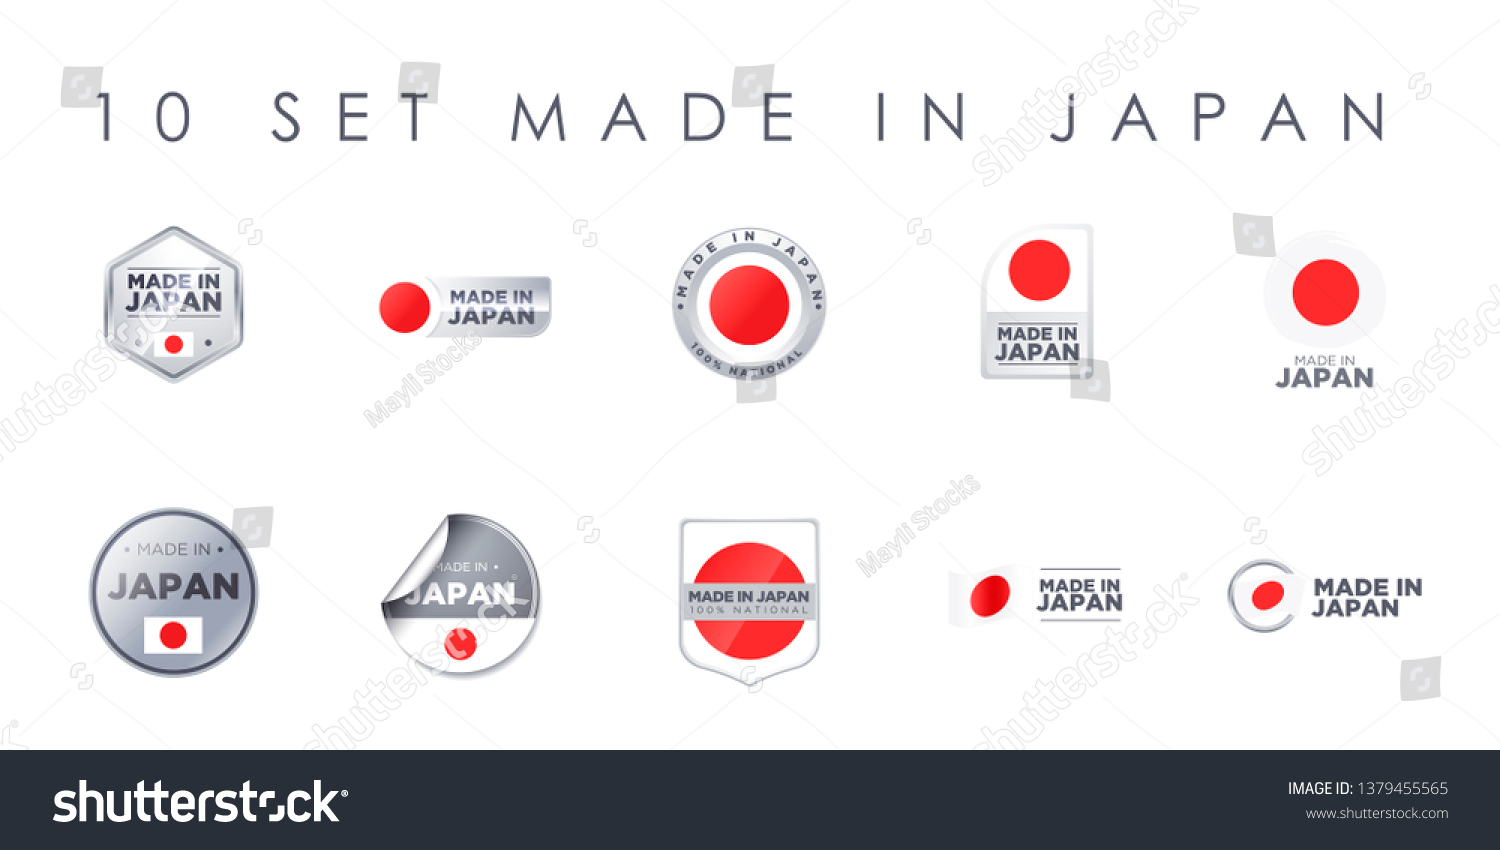 1,682 Made in japan stamp Images, Stock Photos & Vectors | Shutterstock